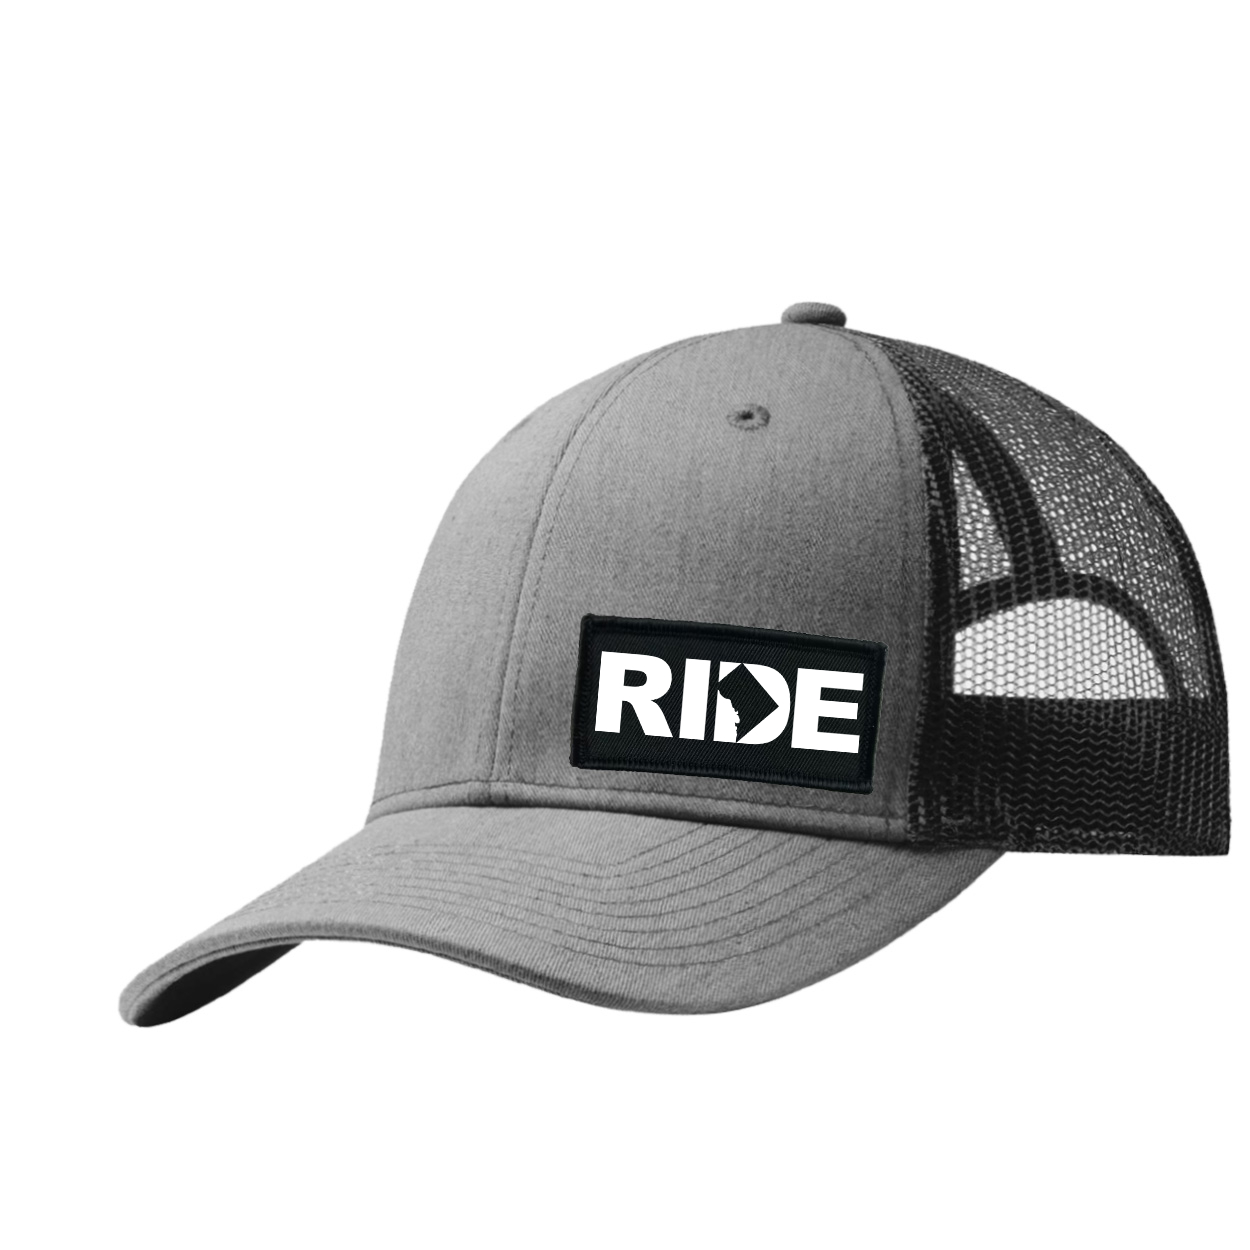 Ride District of Columbia Night Out Woven Patch Snapback Trucker Hat Heather Gray/Black (White Logo)